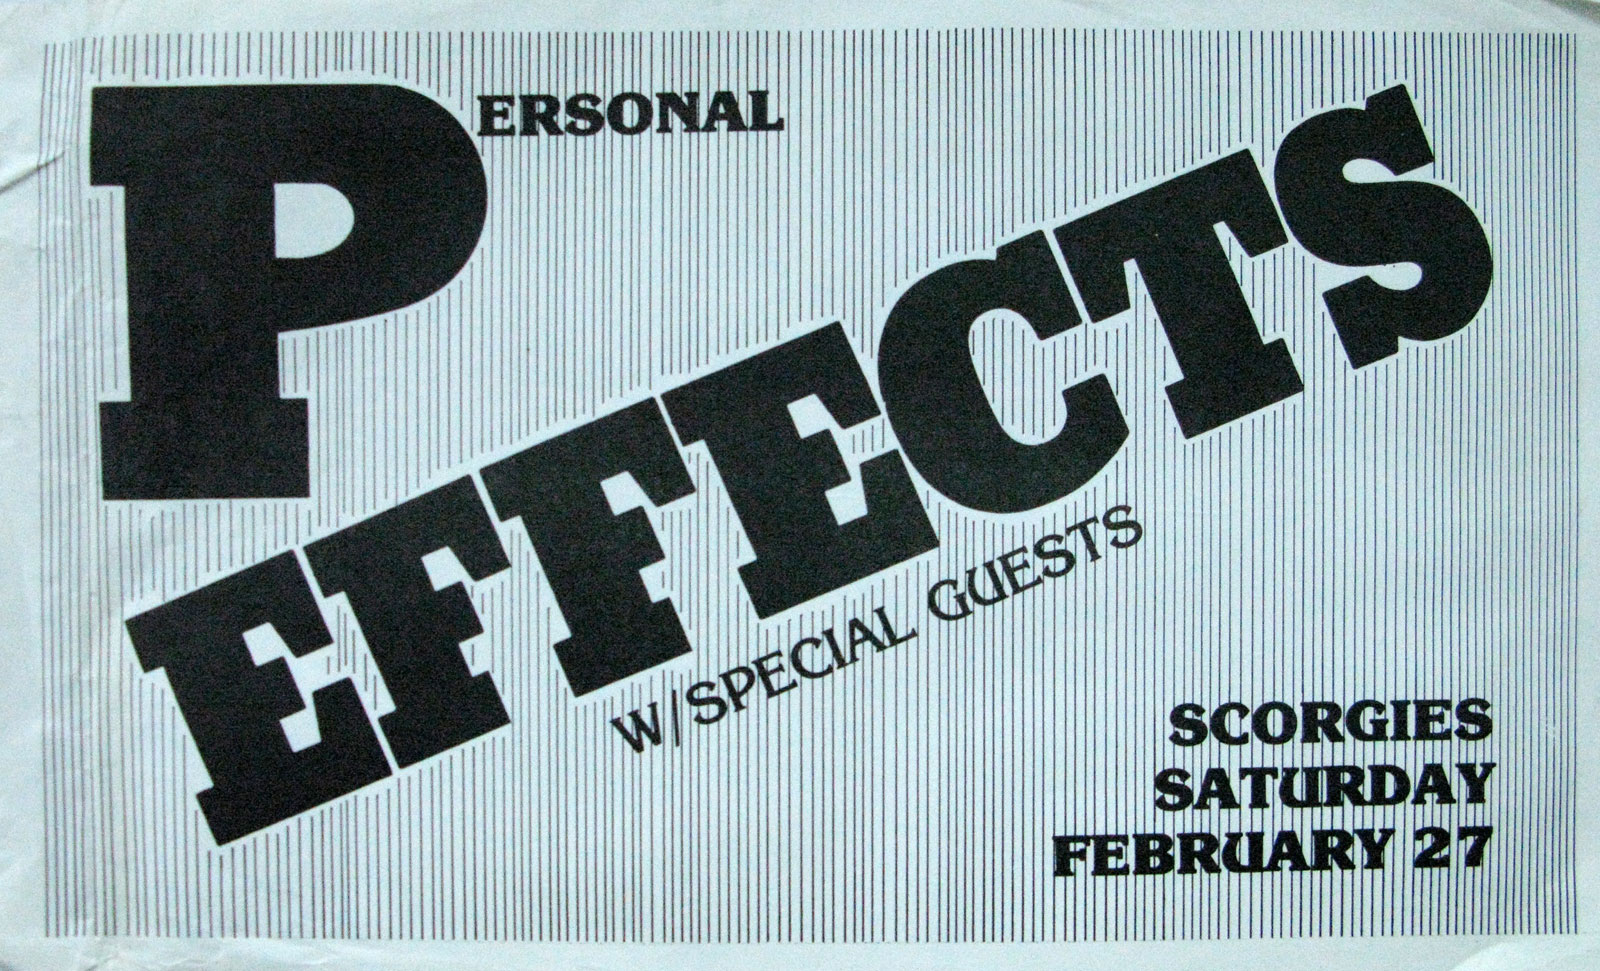 Poster for Personal Effects at Scorgies in Rochester, New York 02.27.1982